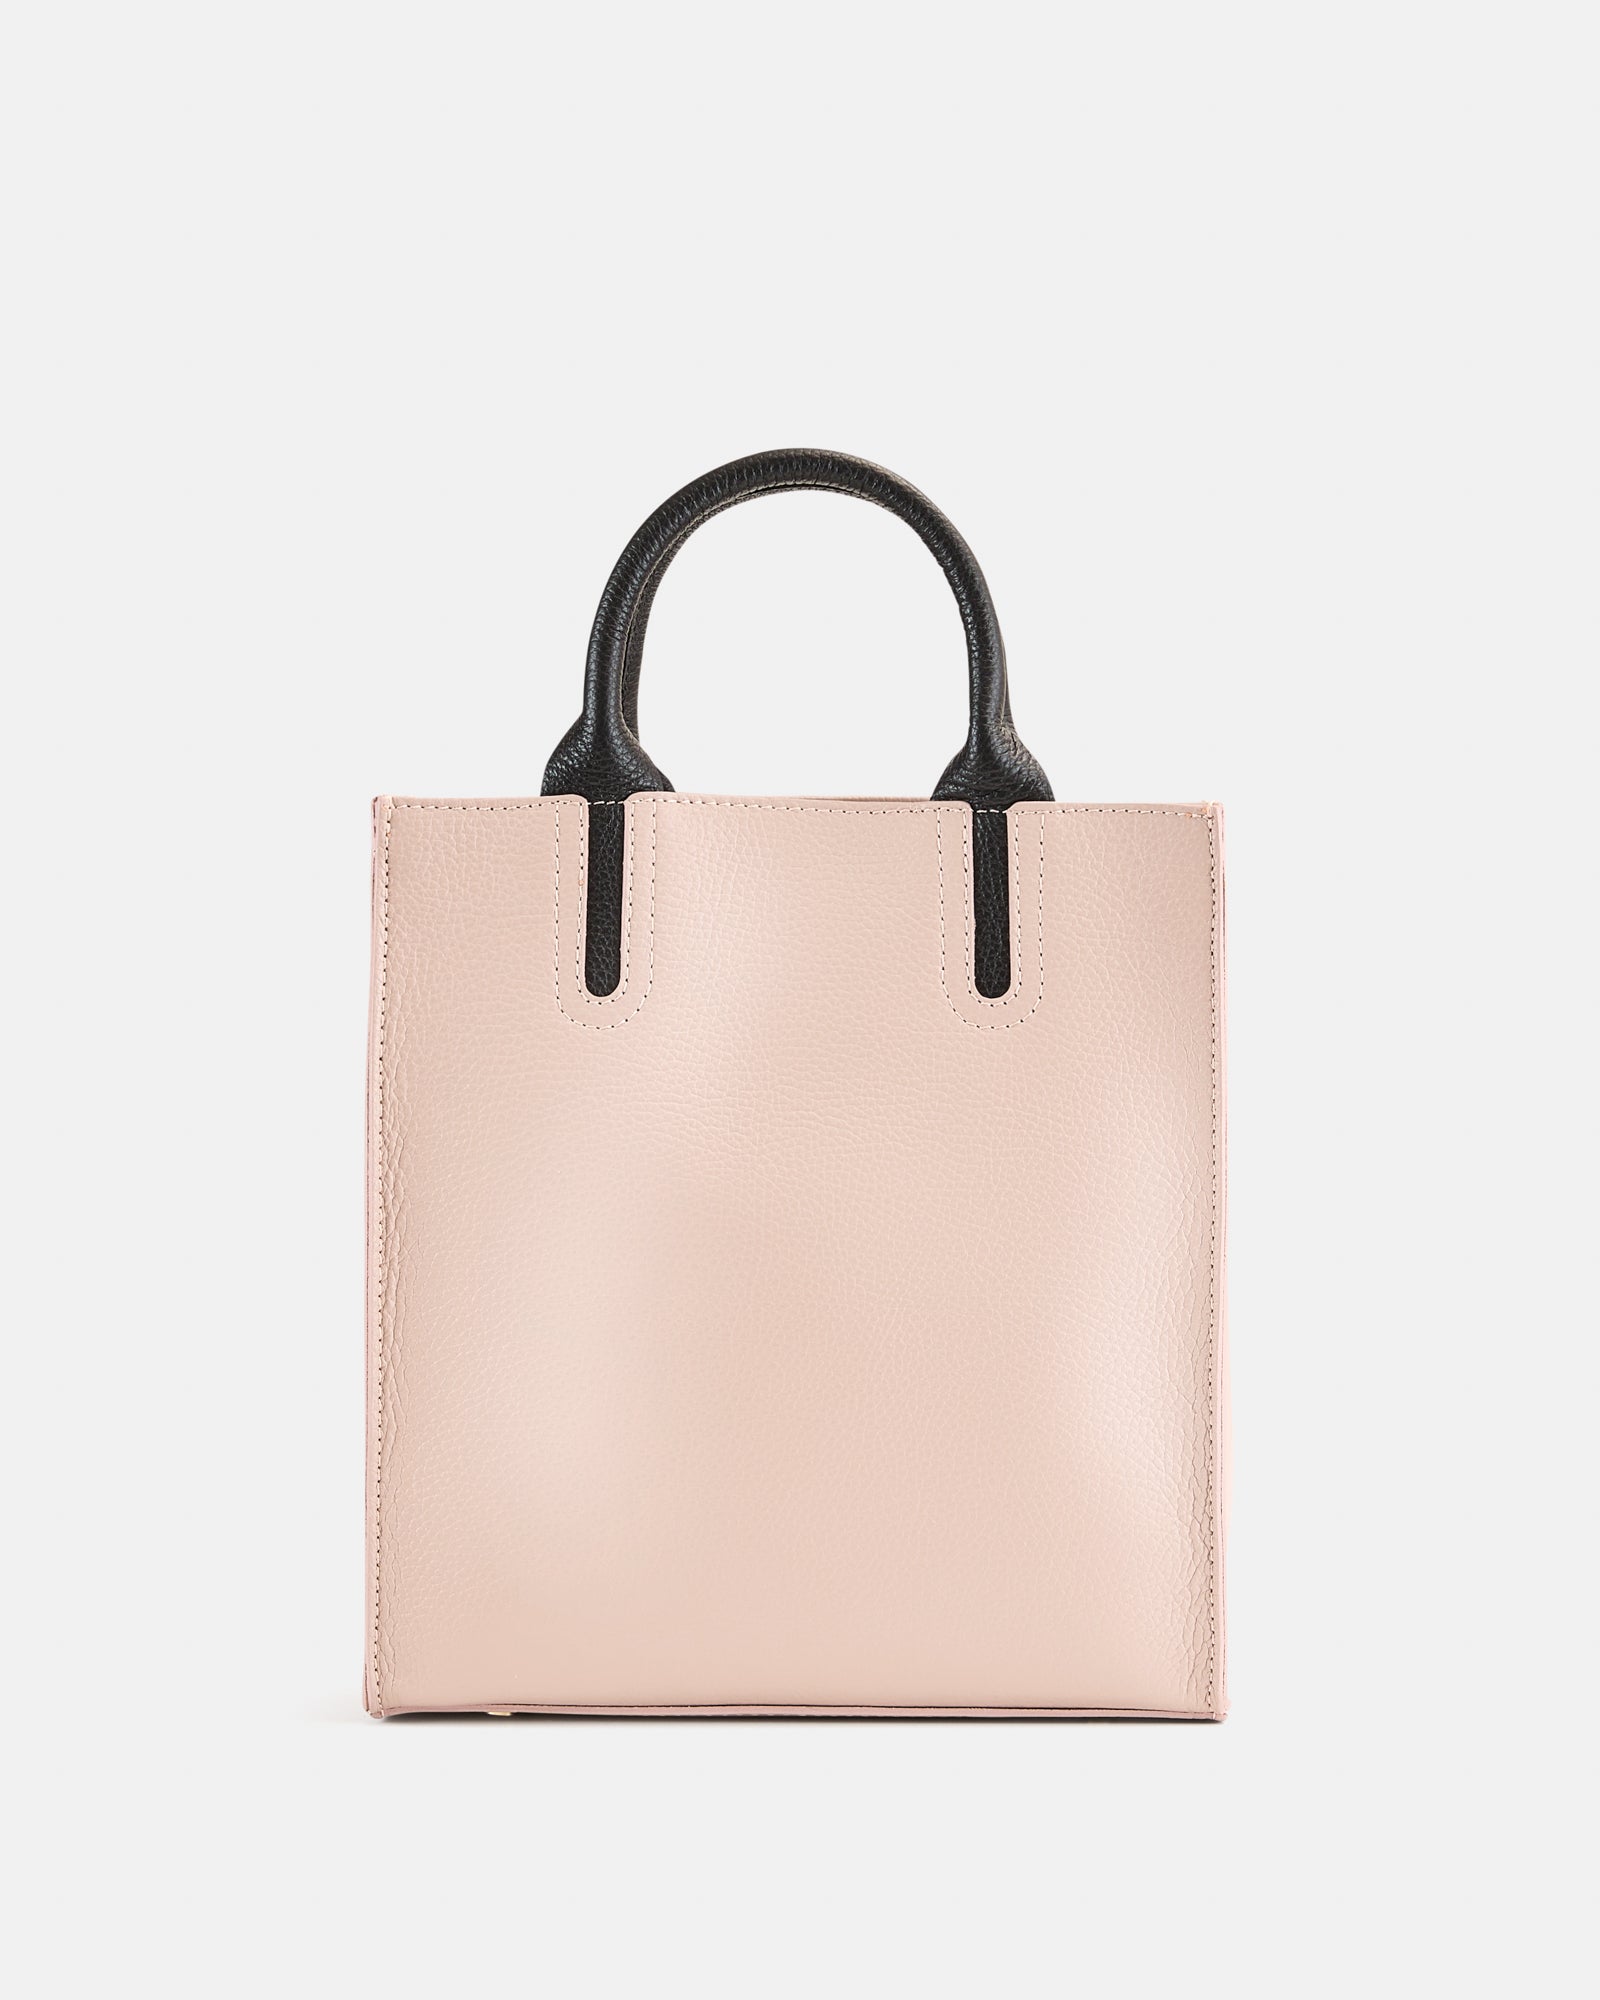 Bigger is better - The new Elle Tote Bag comes with a longer